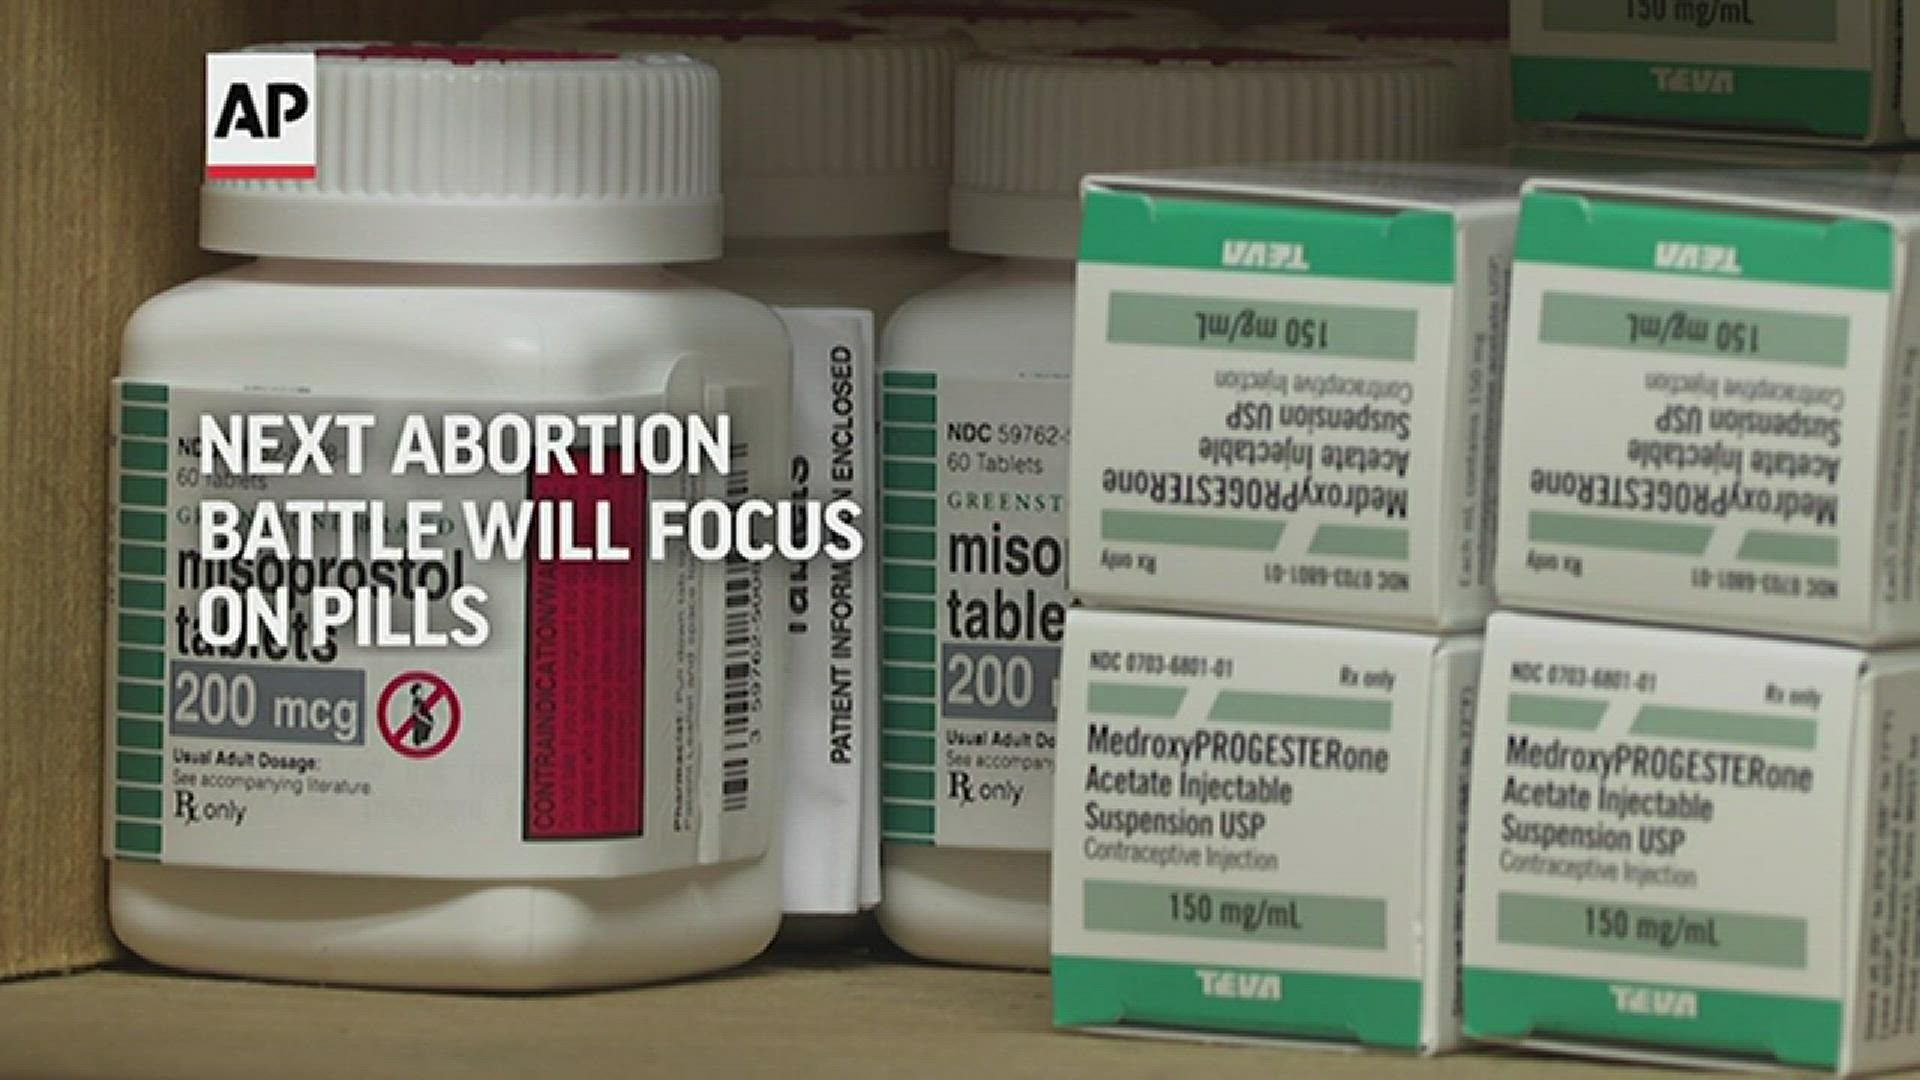 The battle over access to medication abortions will only grow in importance if the Supreme Court overturns Roe vs. Wade.